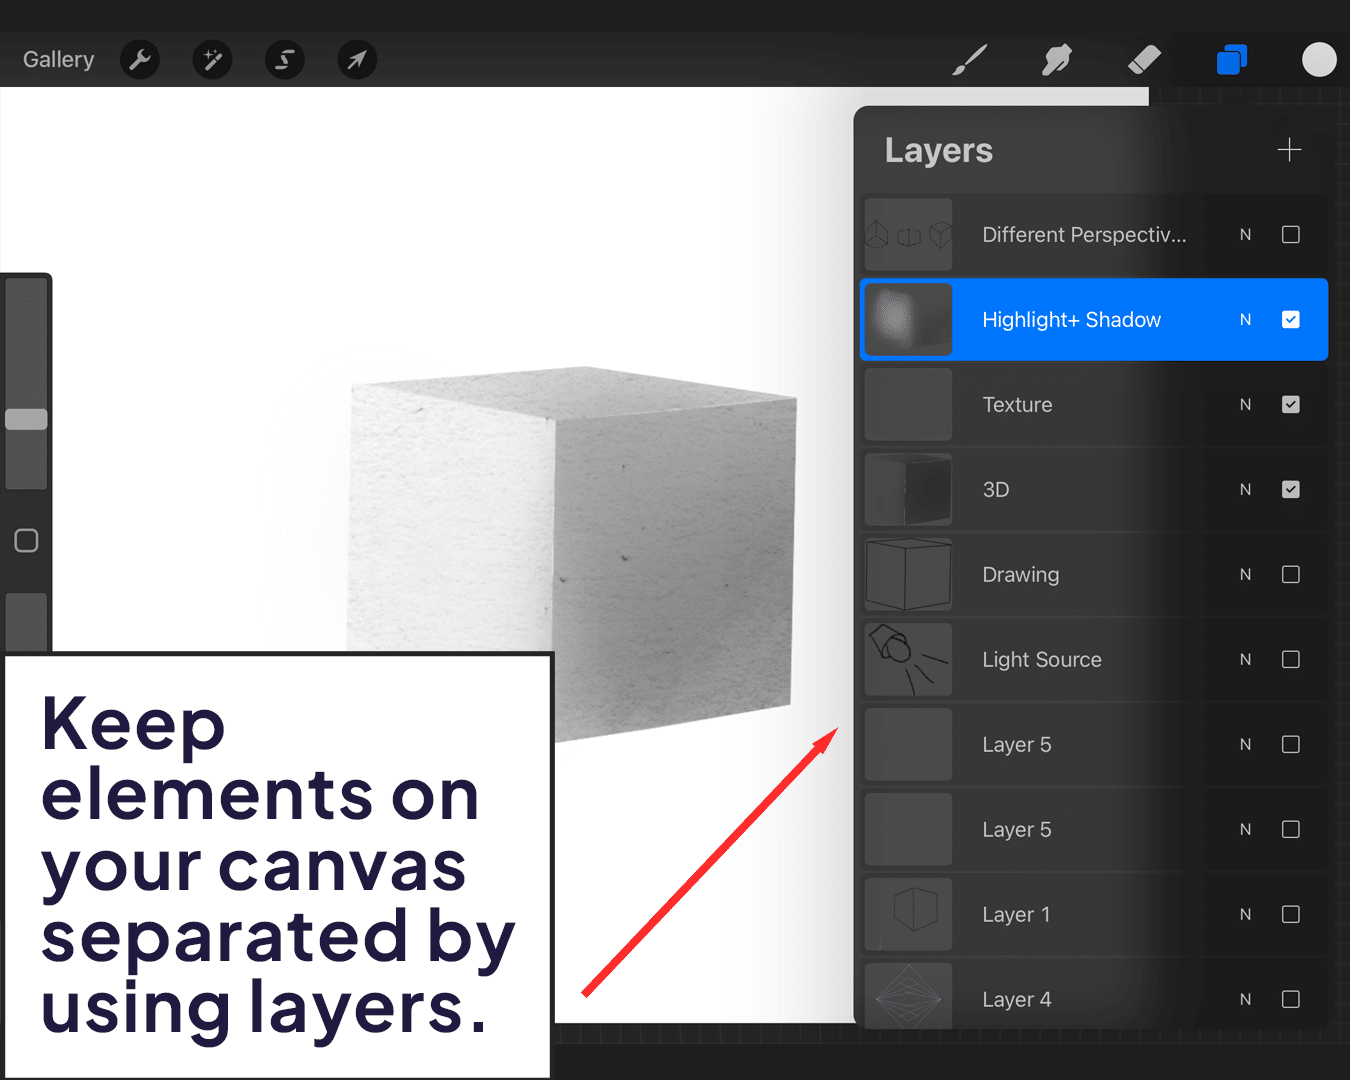 Use layers to separate elements